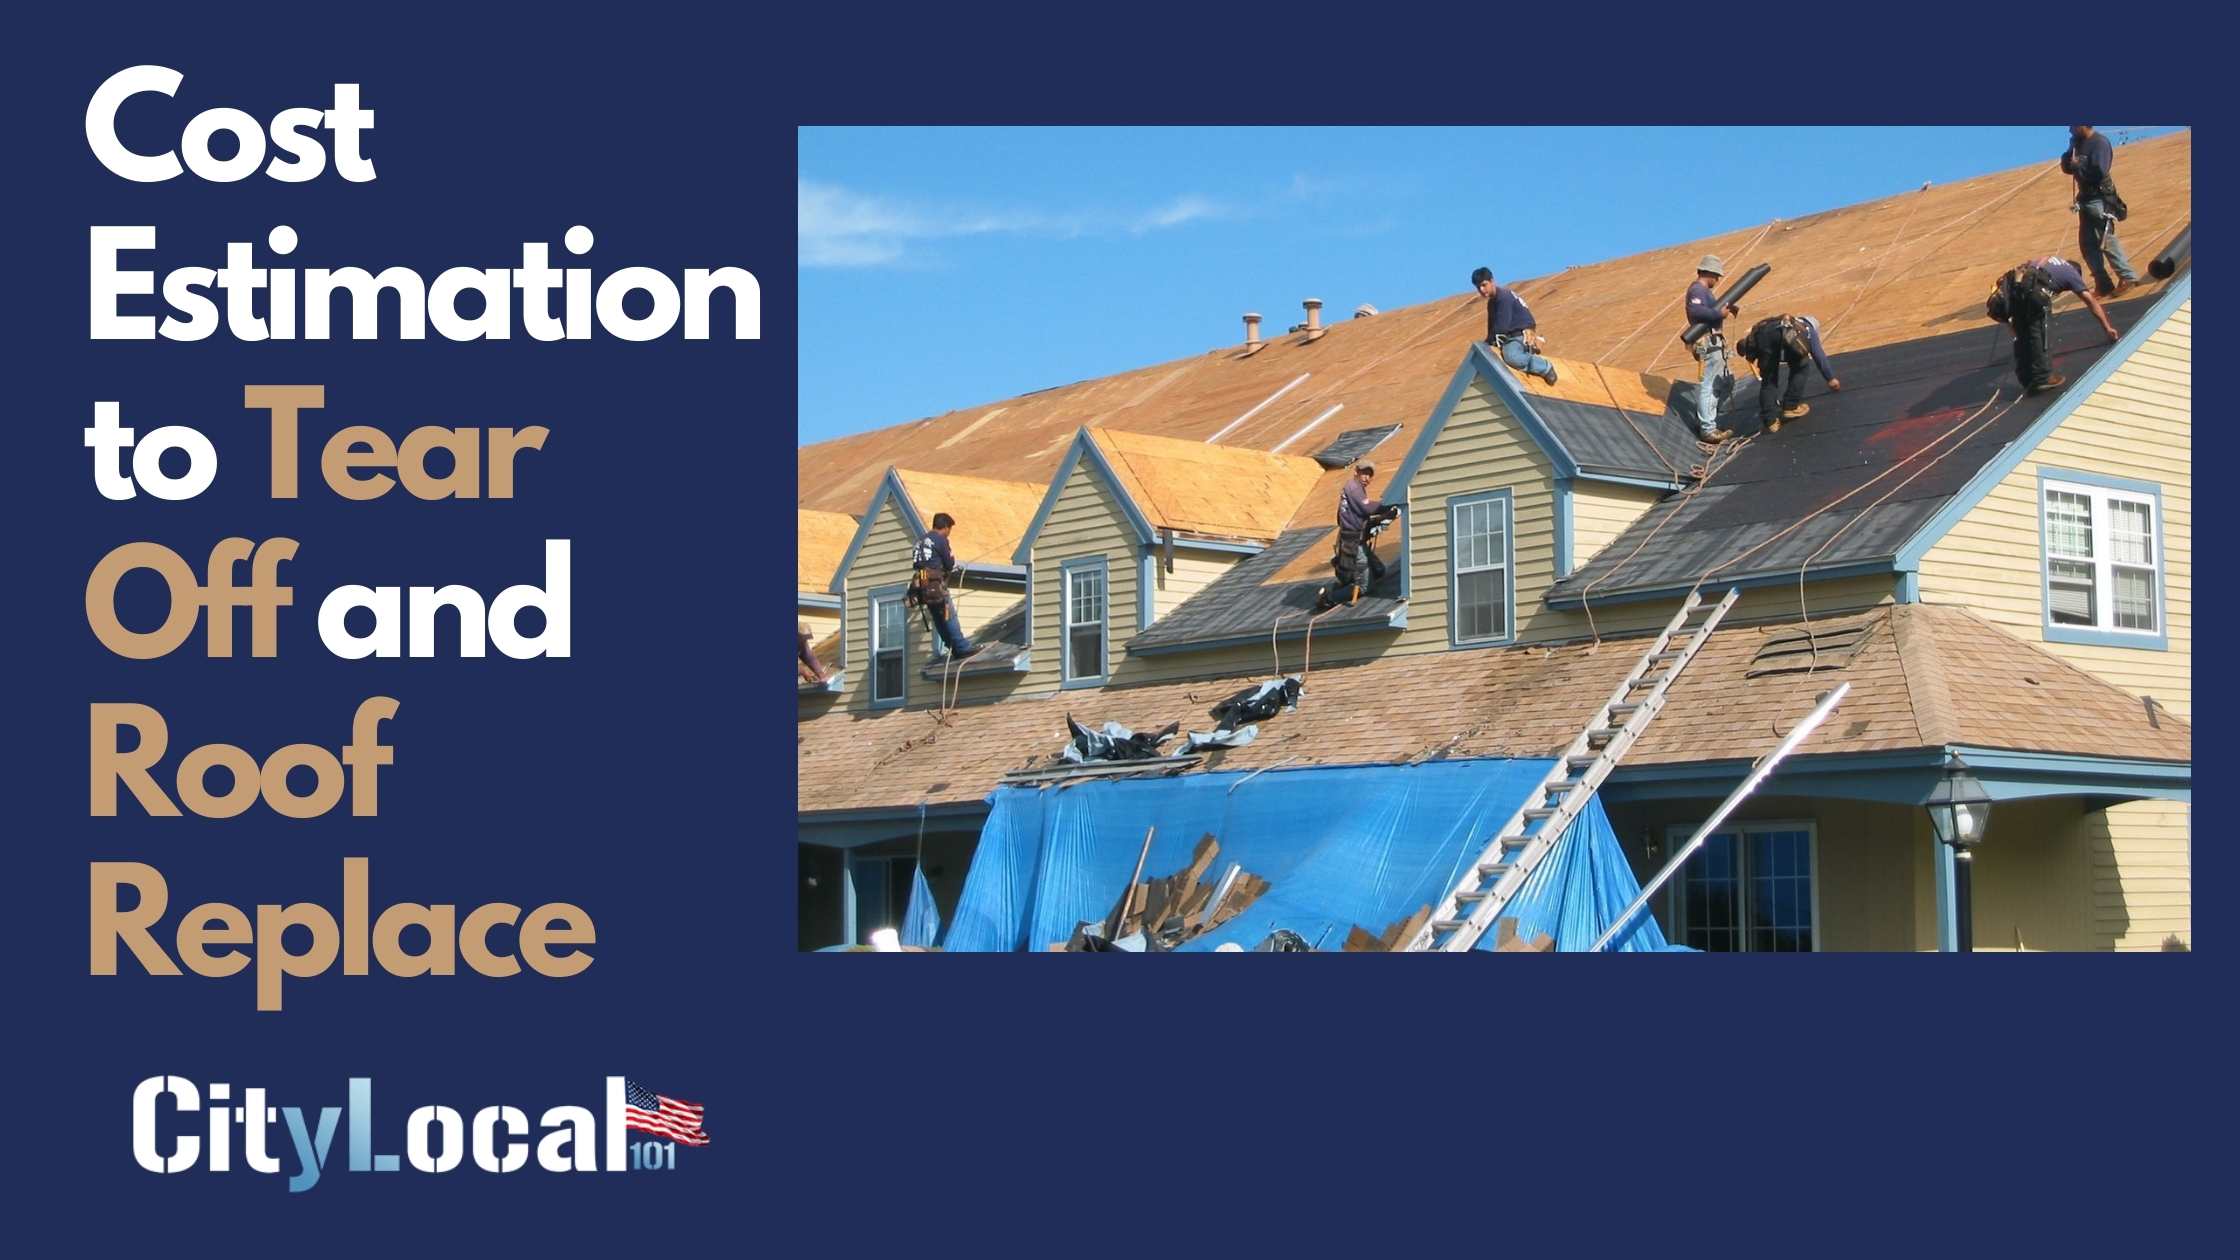 Cost estimation to Tear Off and Replace Roof